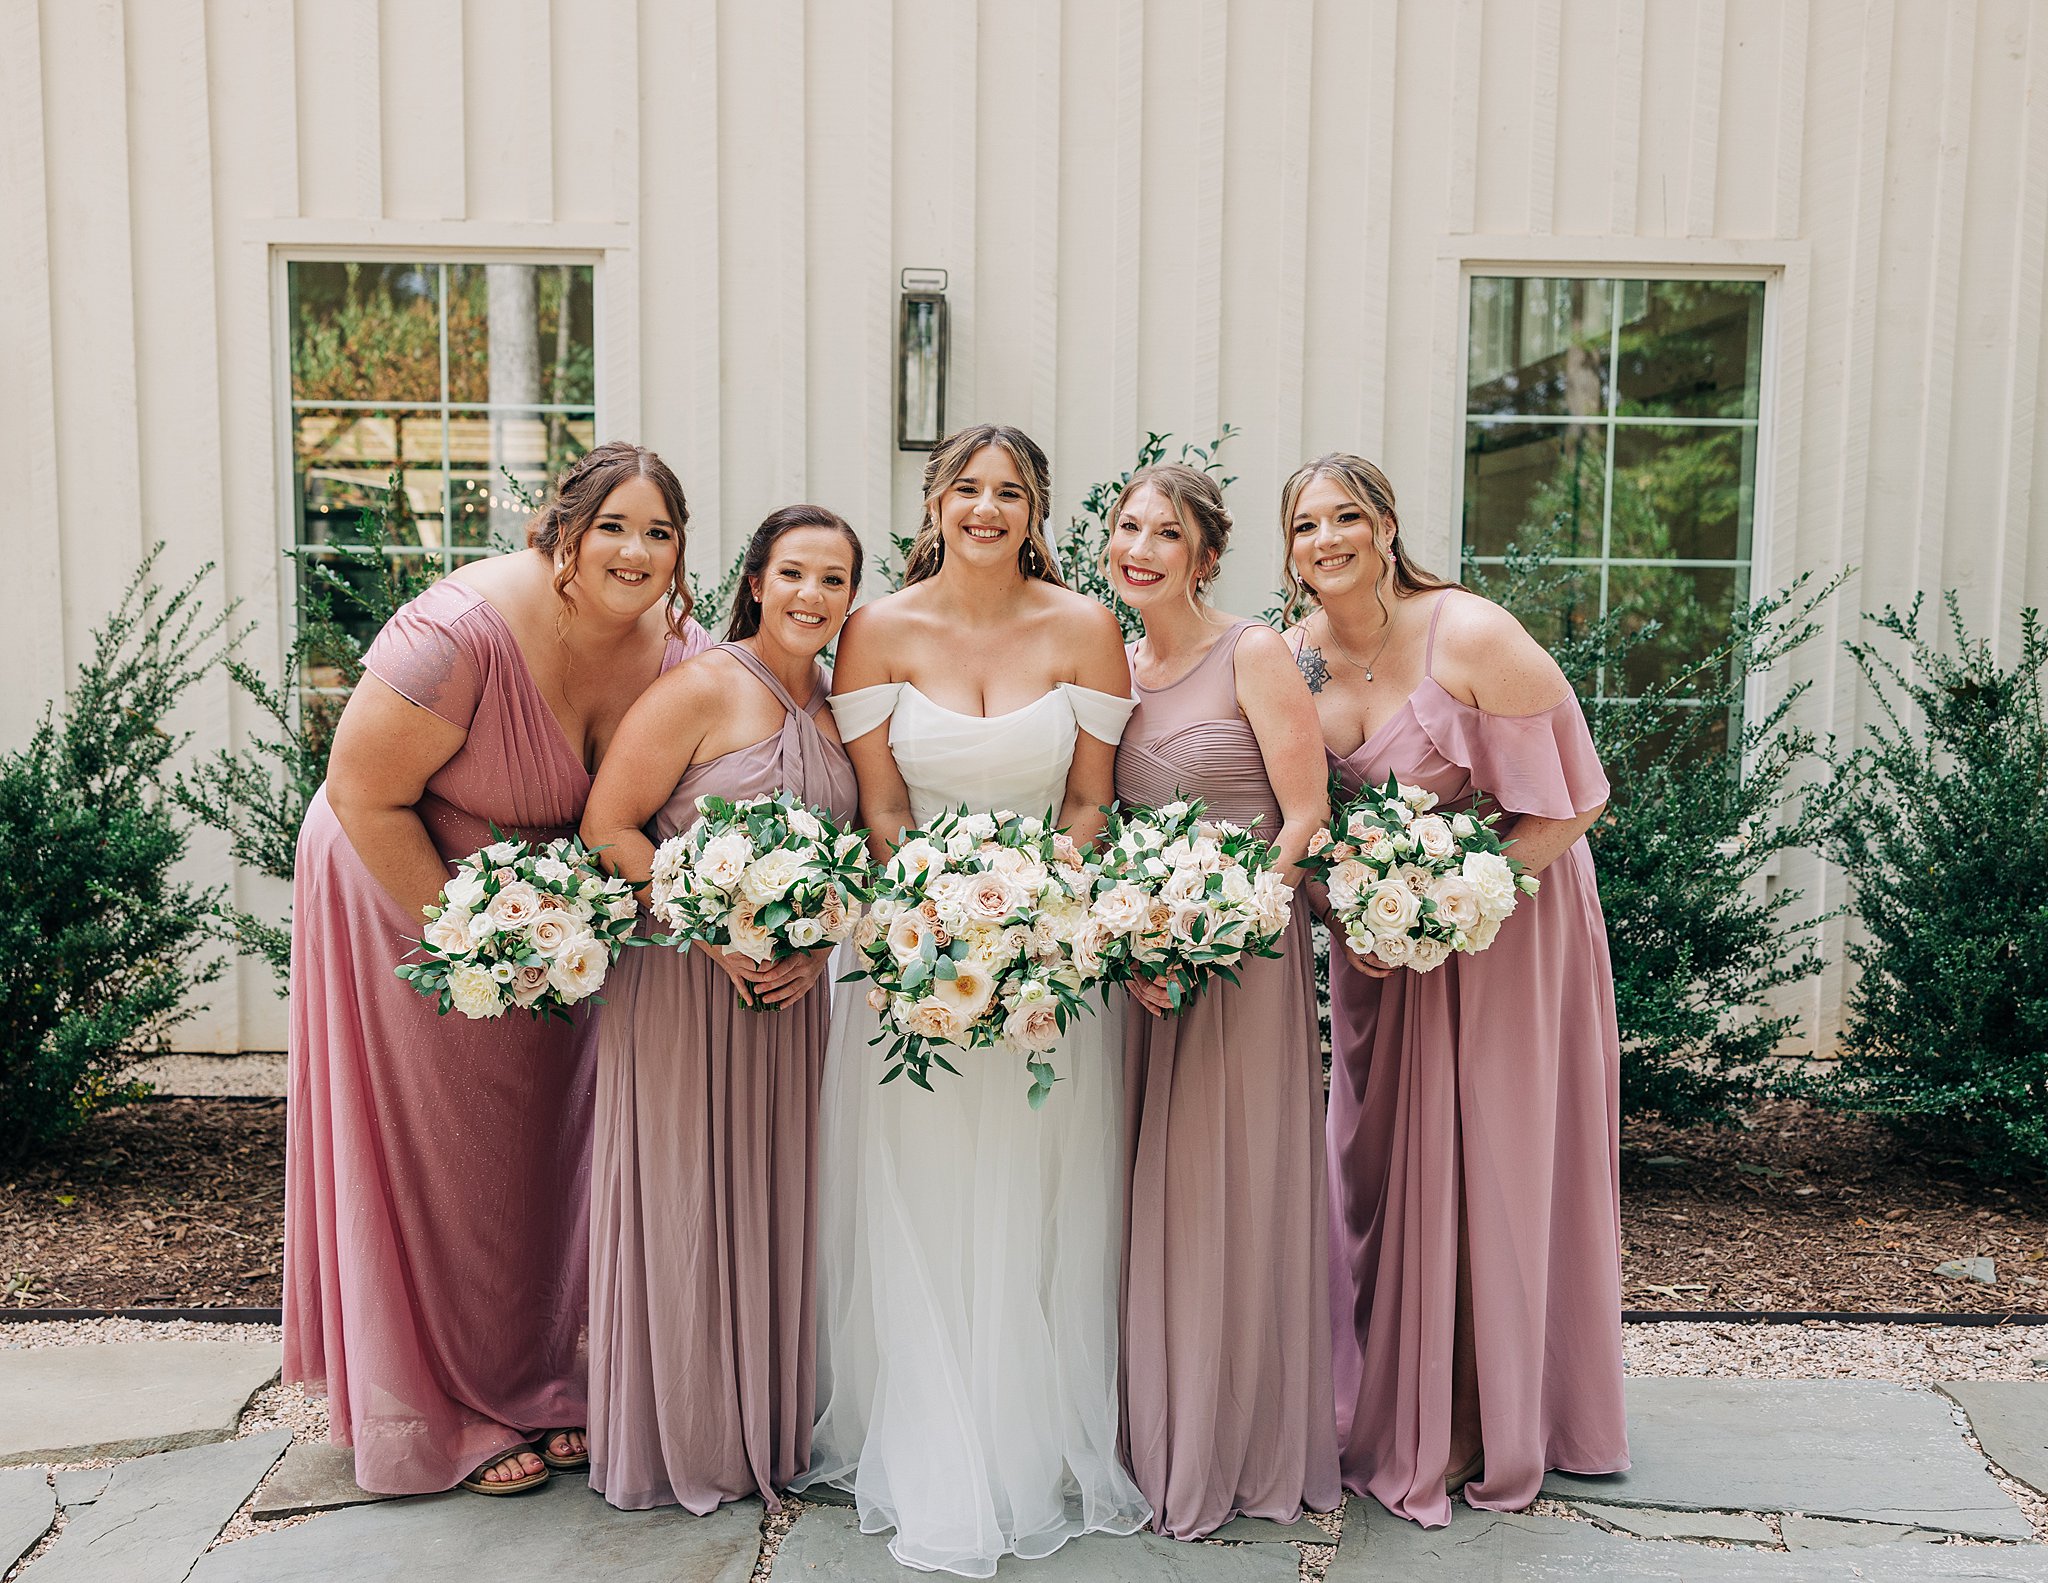 A bride smiles with her bridesmaids while holding their bouquets